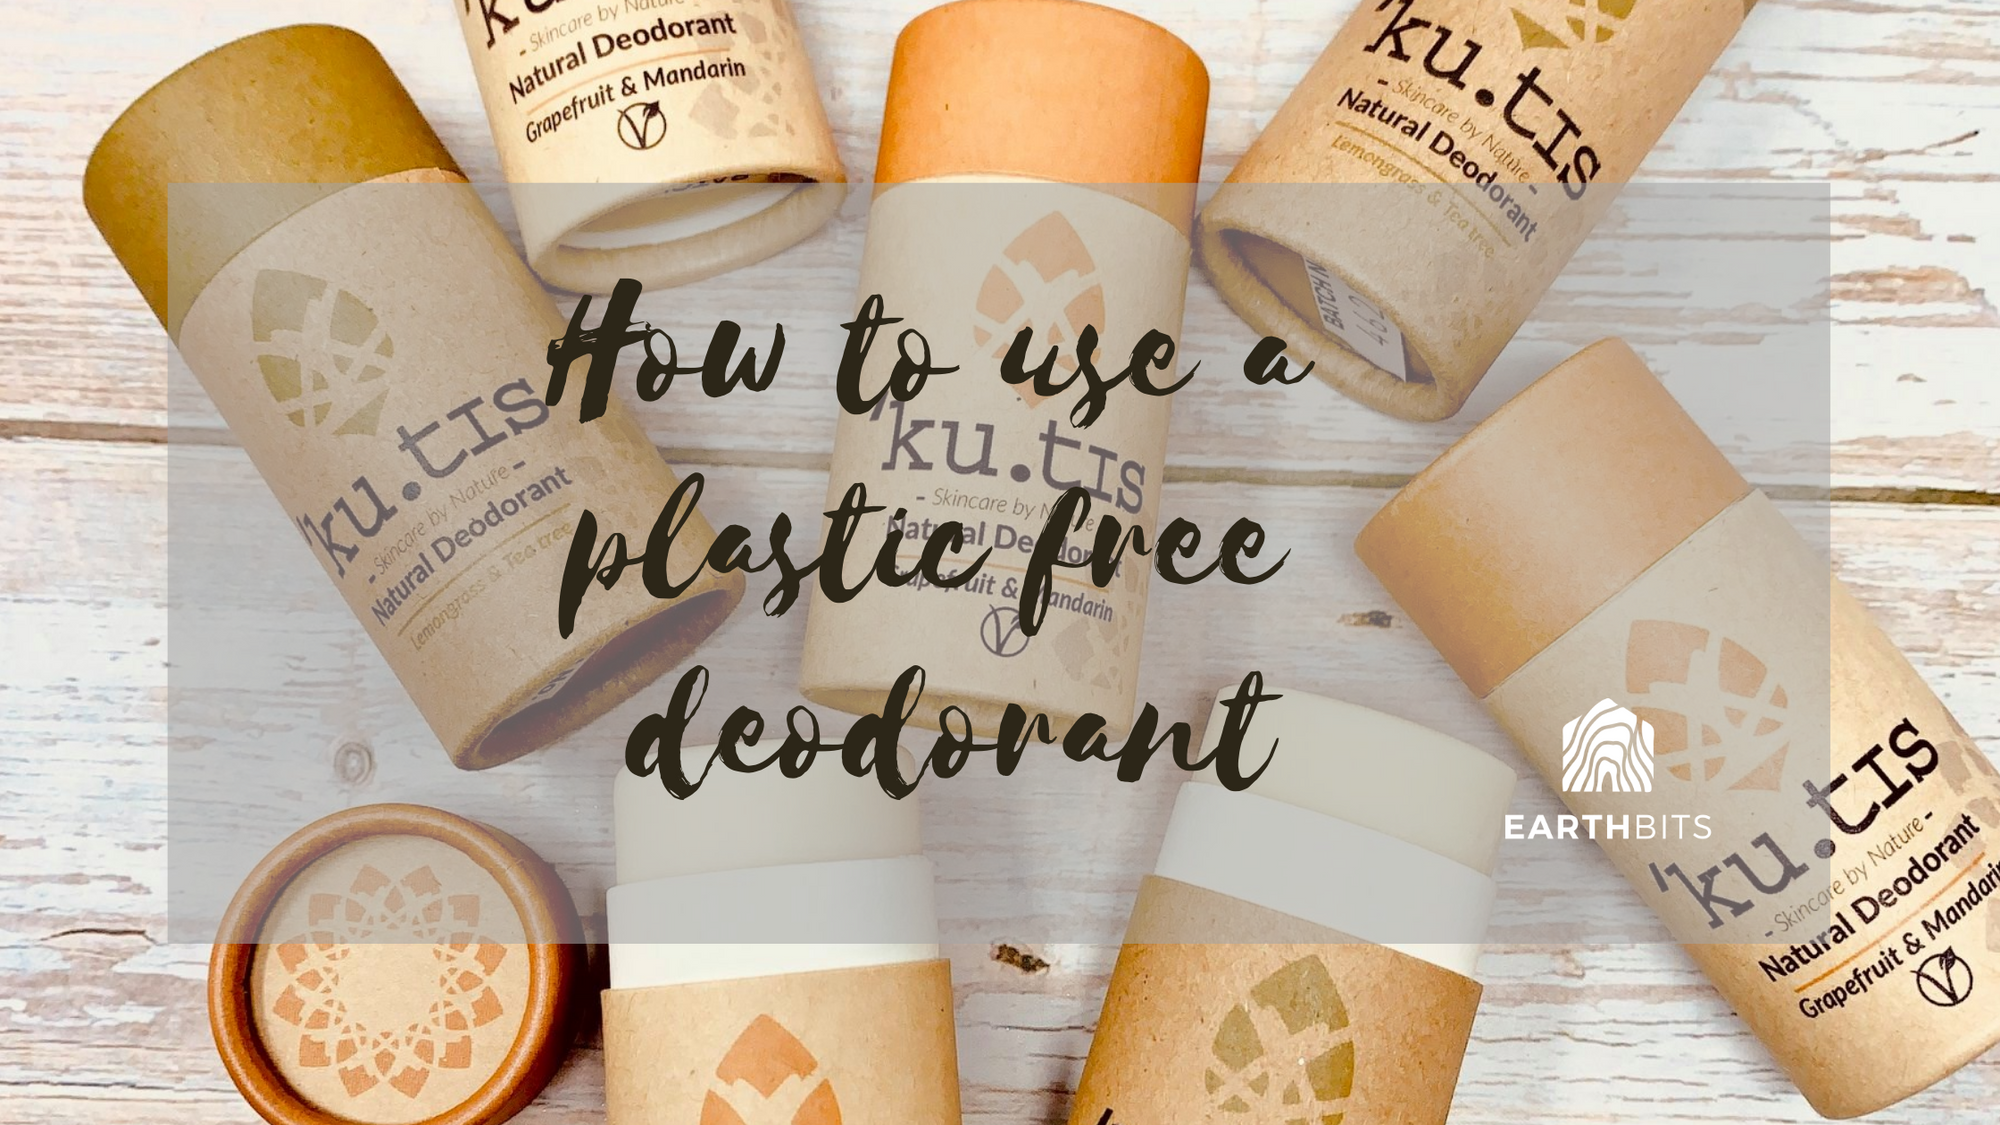 how to use a plastic free deodorant 